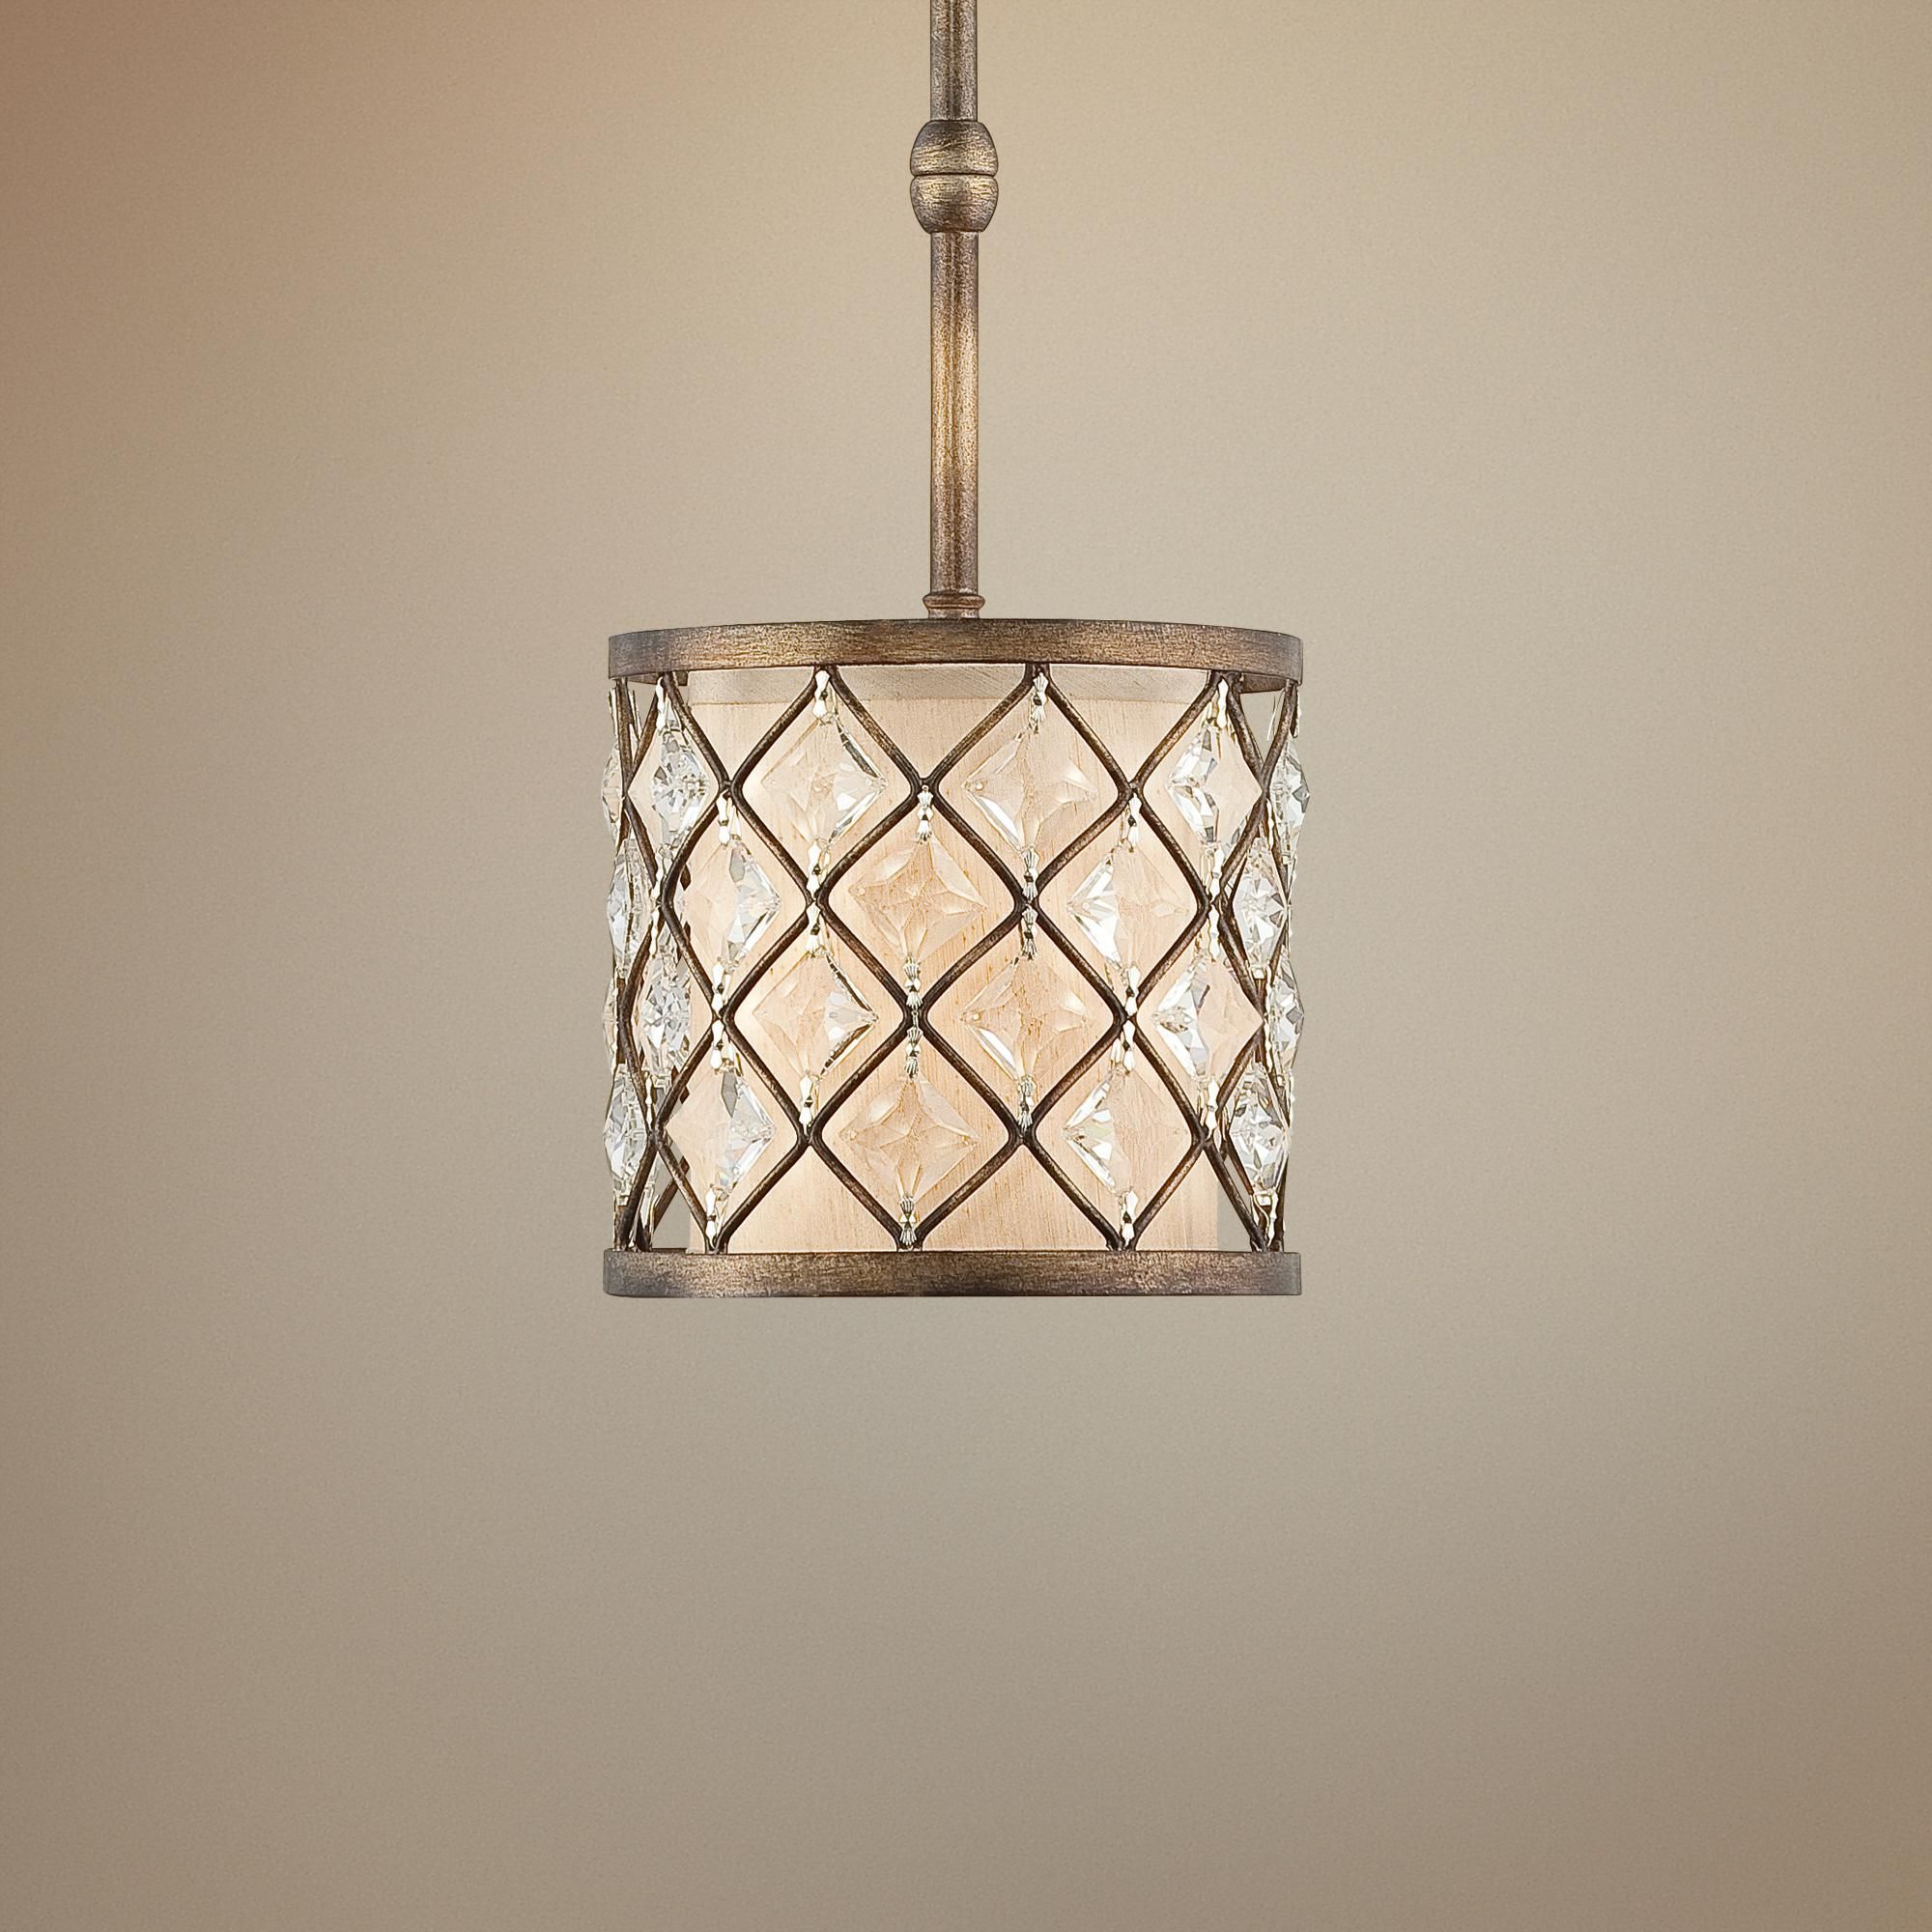 Jeweled Golden Bronze 9" Wide Mini Pendant Light – #p0363 With Regard To Most Up To Date Golden Bronze And Ice Glass Pendant Lights (View 10 of 20)